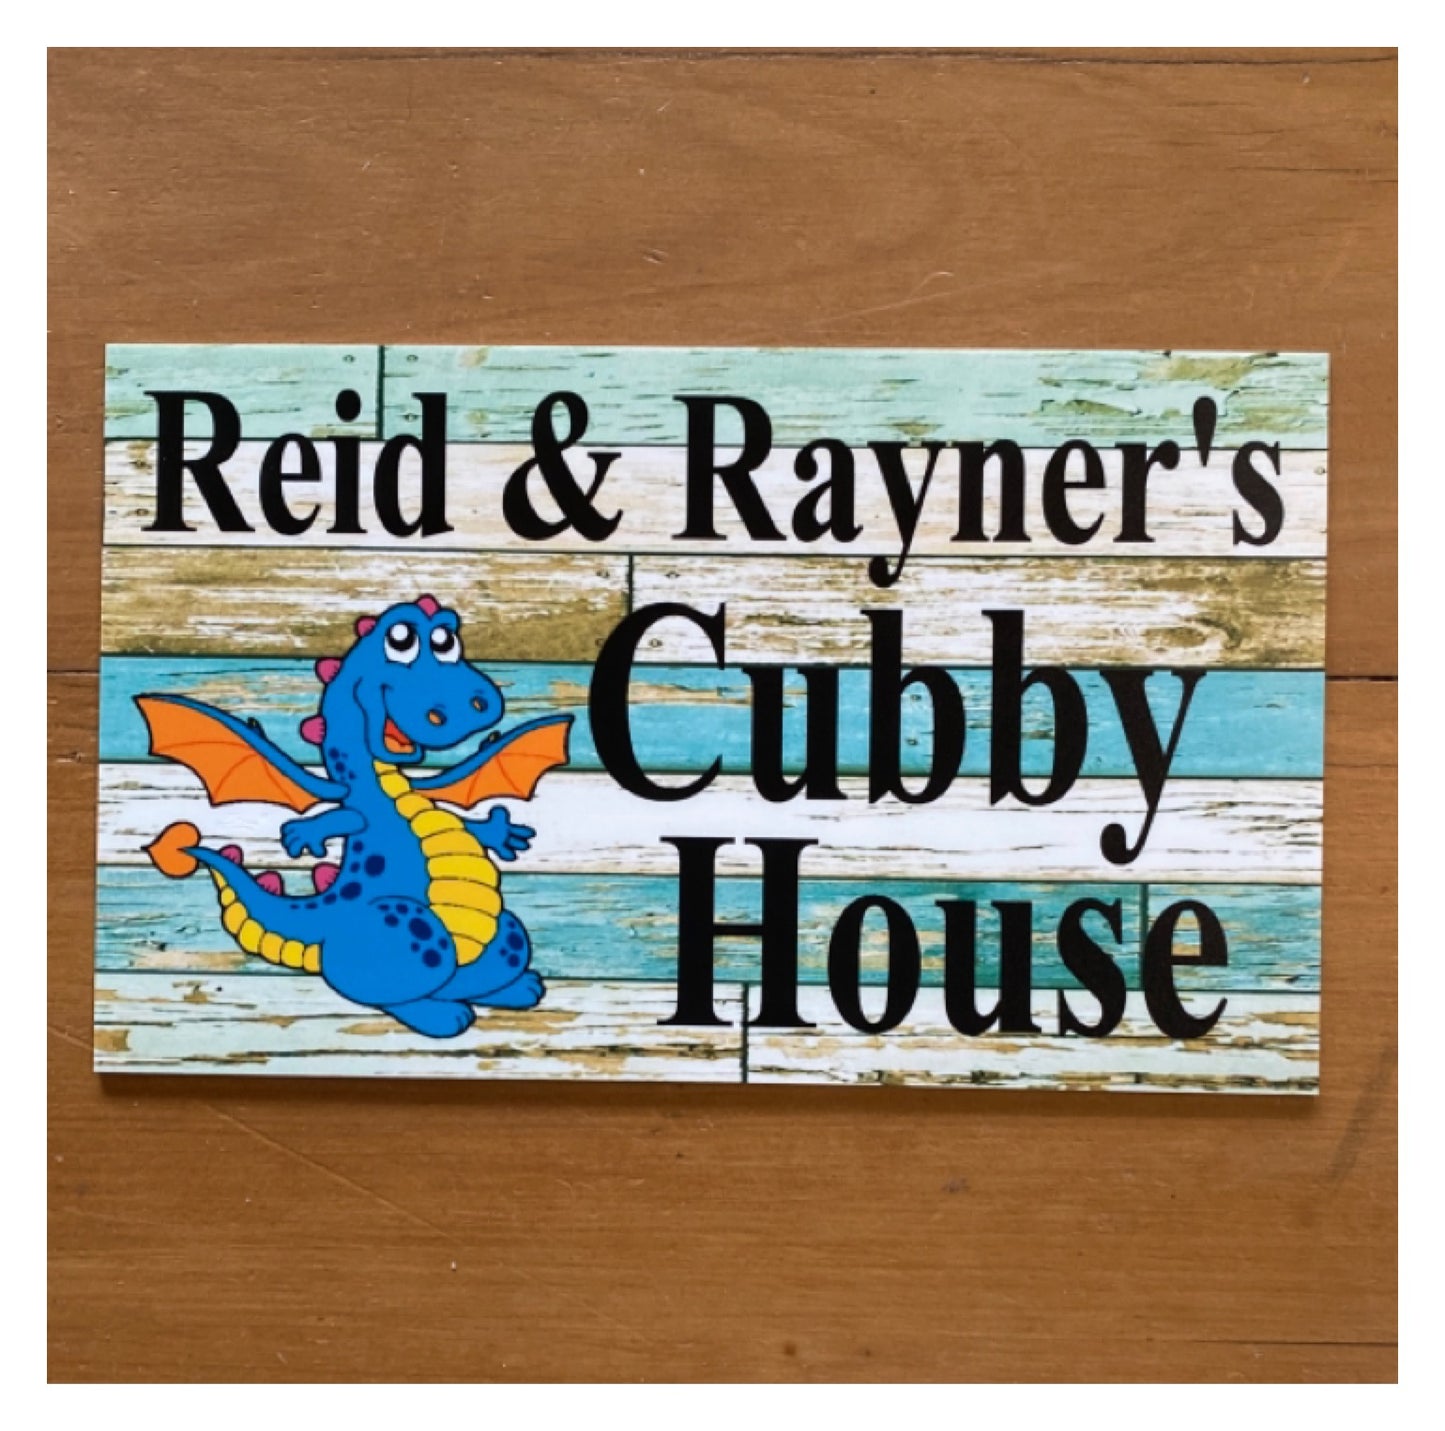 Dragon Magic Cutie Custom Wording Text Sign - The Renmy Store Homewares & Gifts 